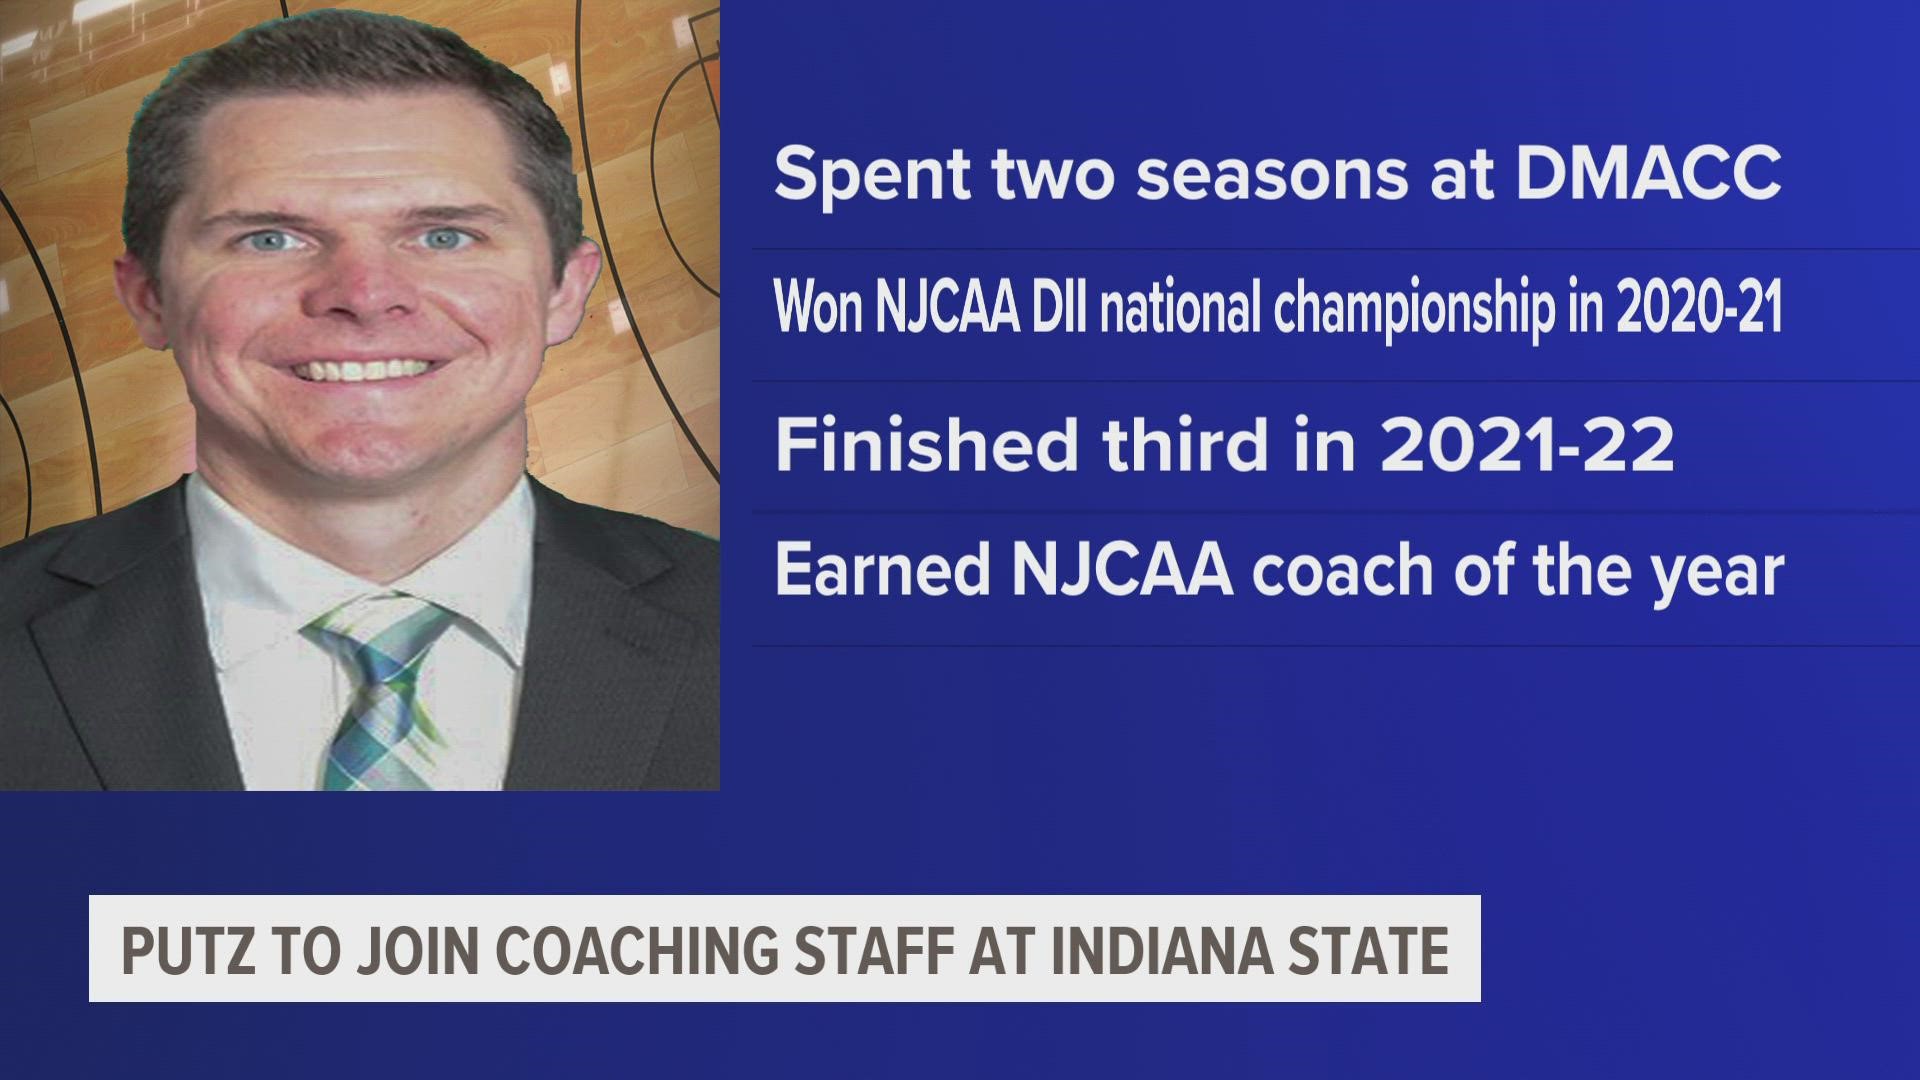 "I am very grateful for the opportunity to work at a program like Indiana State, with such a rich history in its men's basketball program," Brett Putz said.